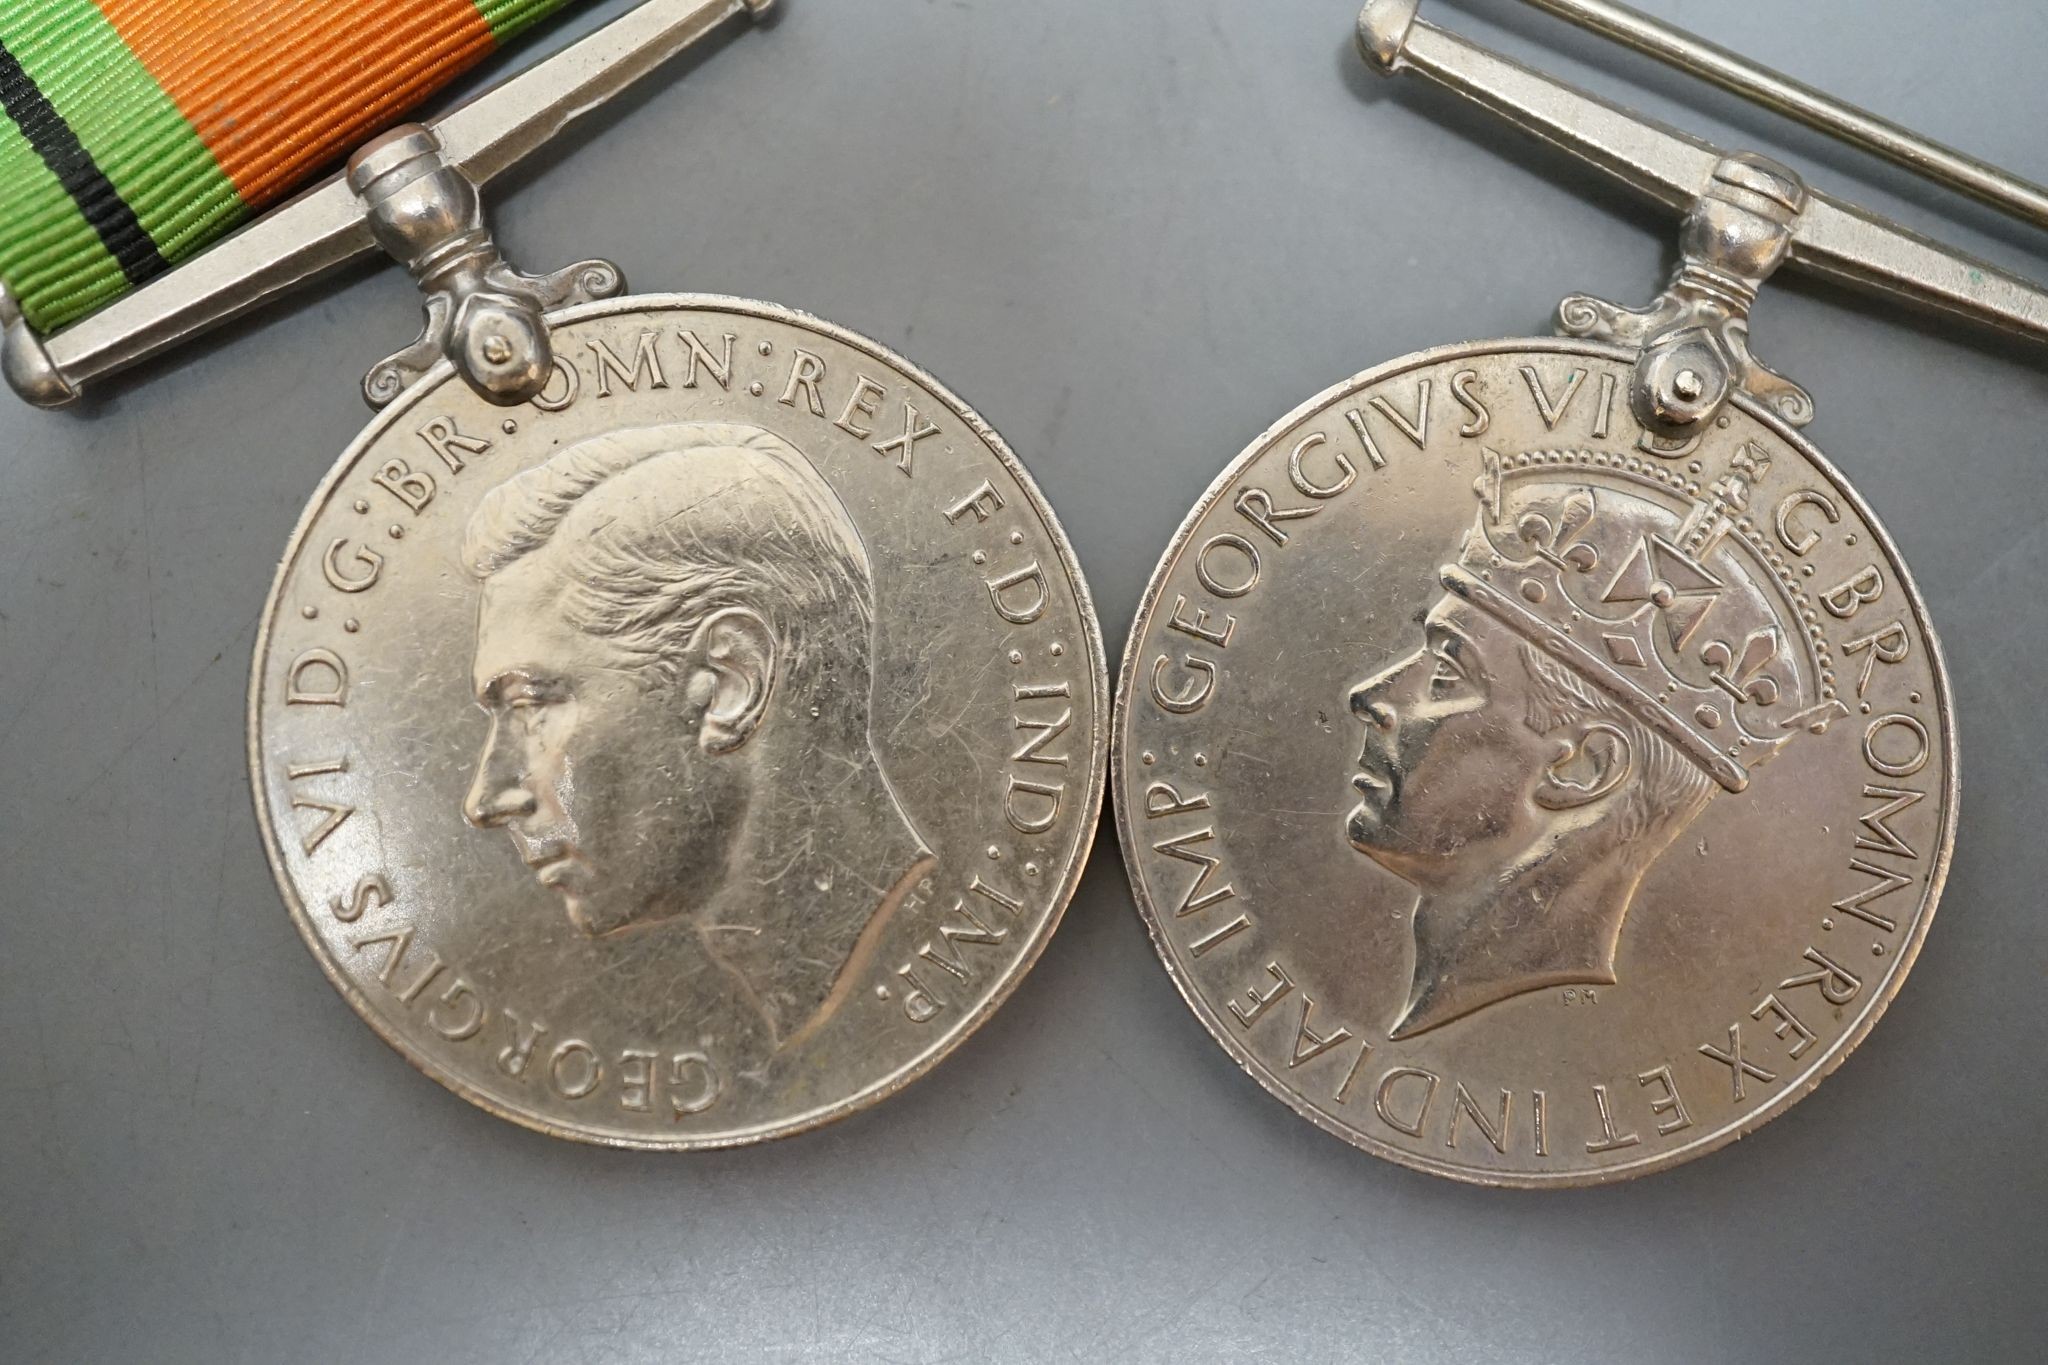 A group of five WW2 medals